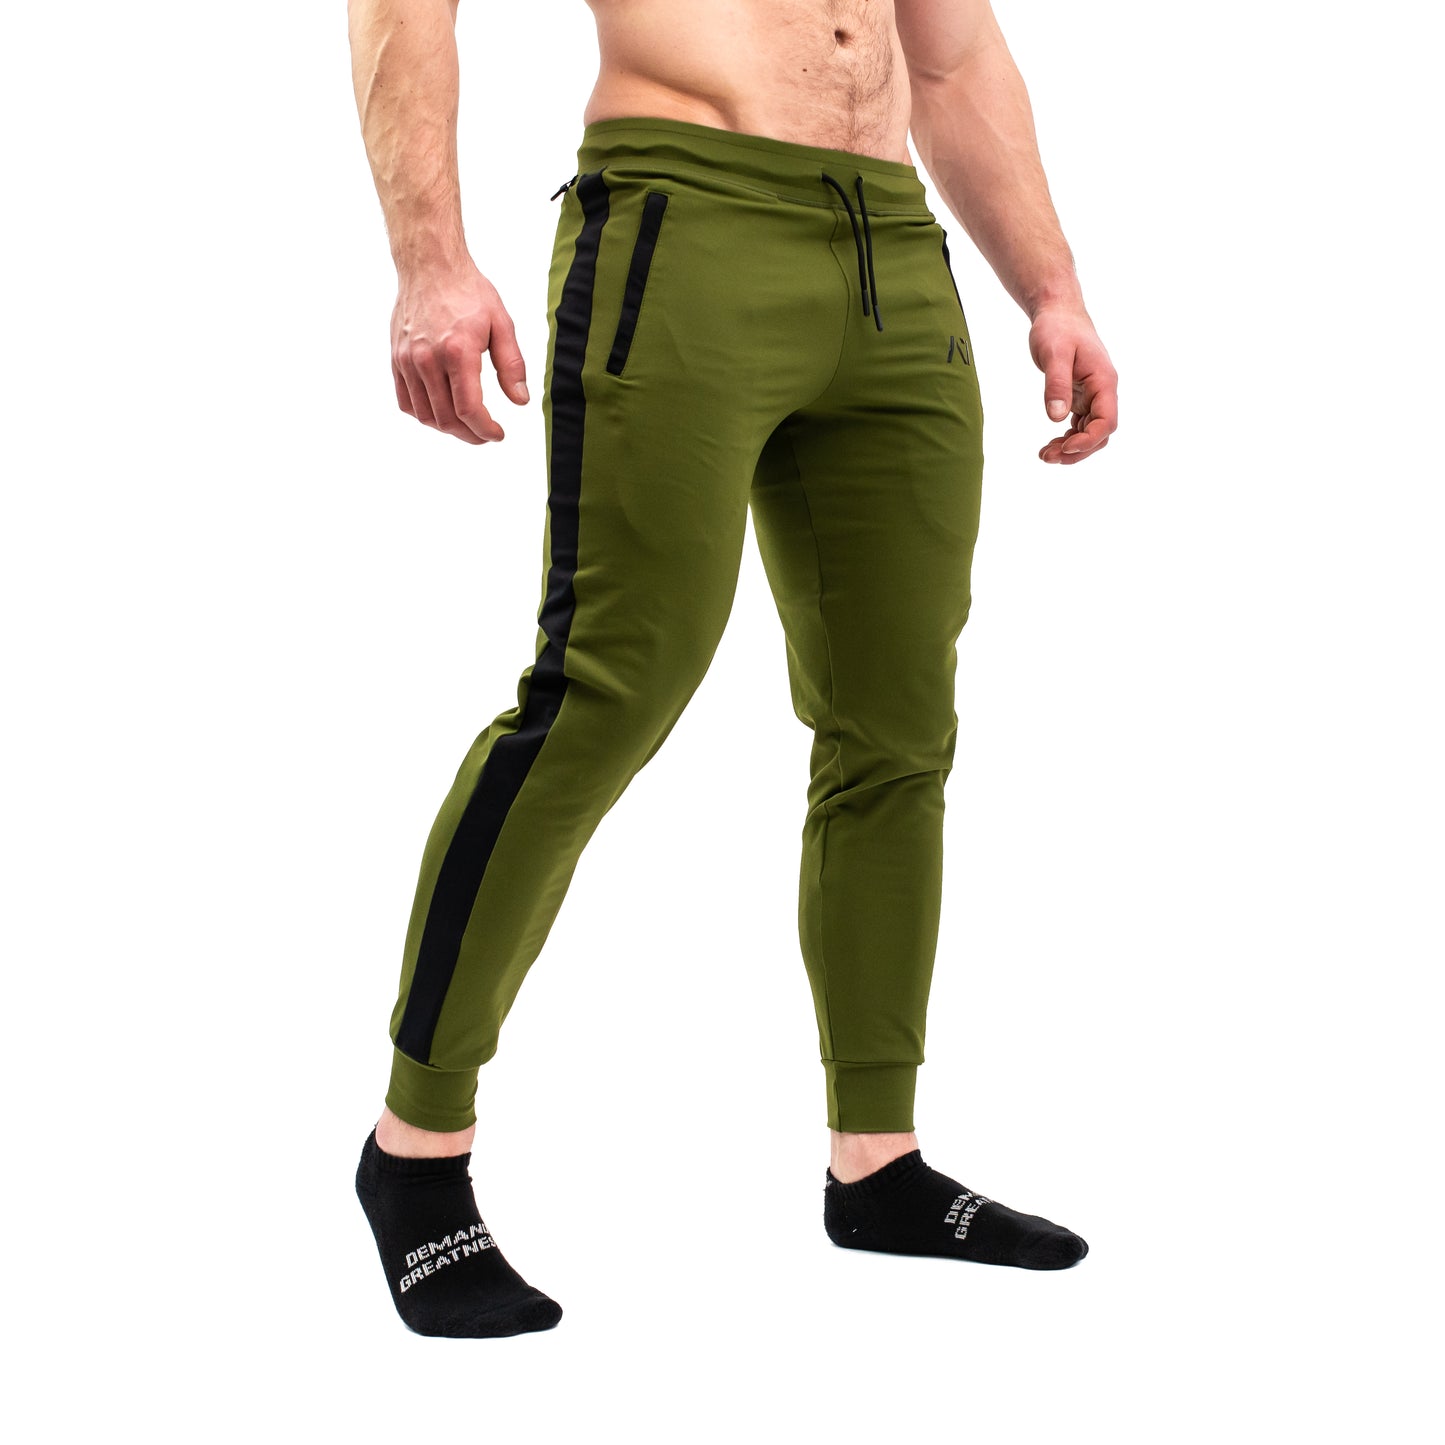 Defy Joggers - Military (Unisex) | A7 Europe Shipping to EU – A7 EUROPE